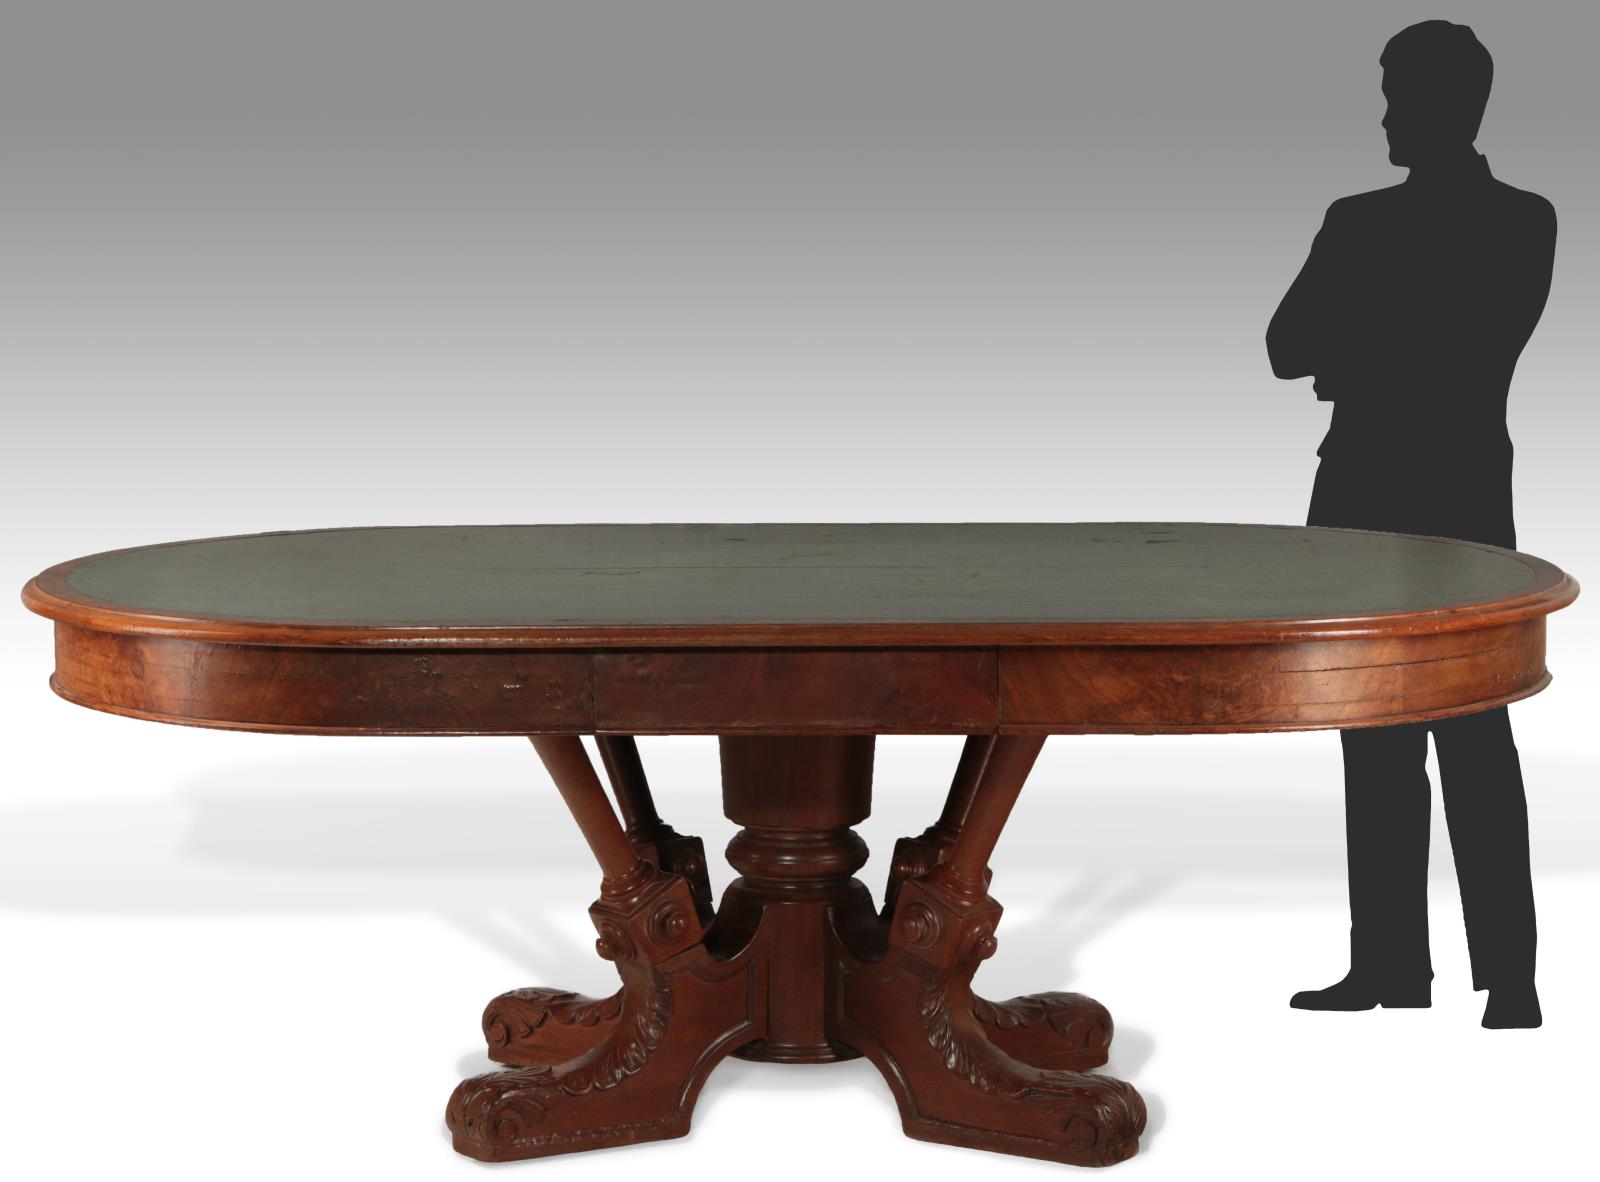 A MASSIVE 19TH C. AMERICAN OVAL LIBRARY TABLE